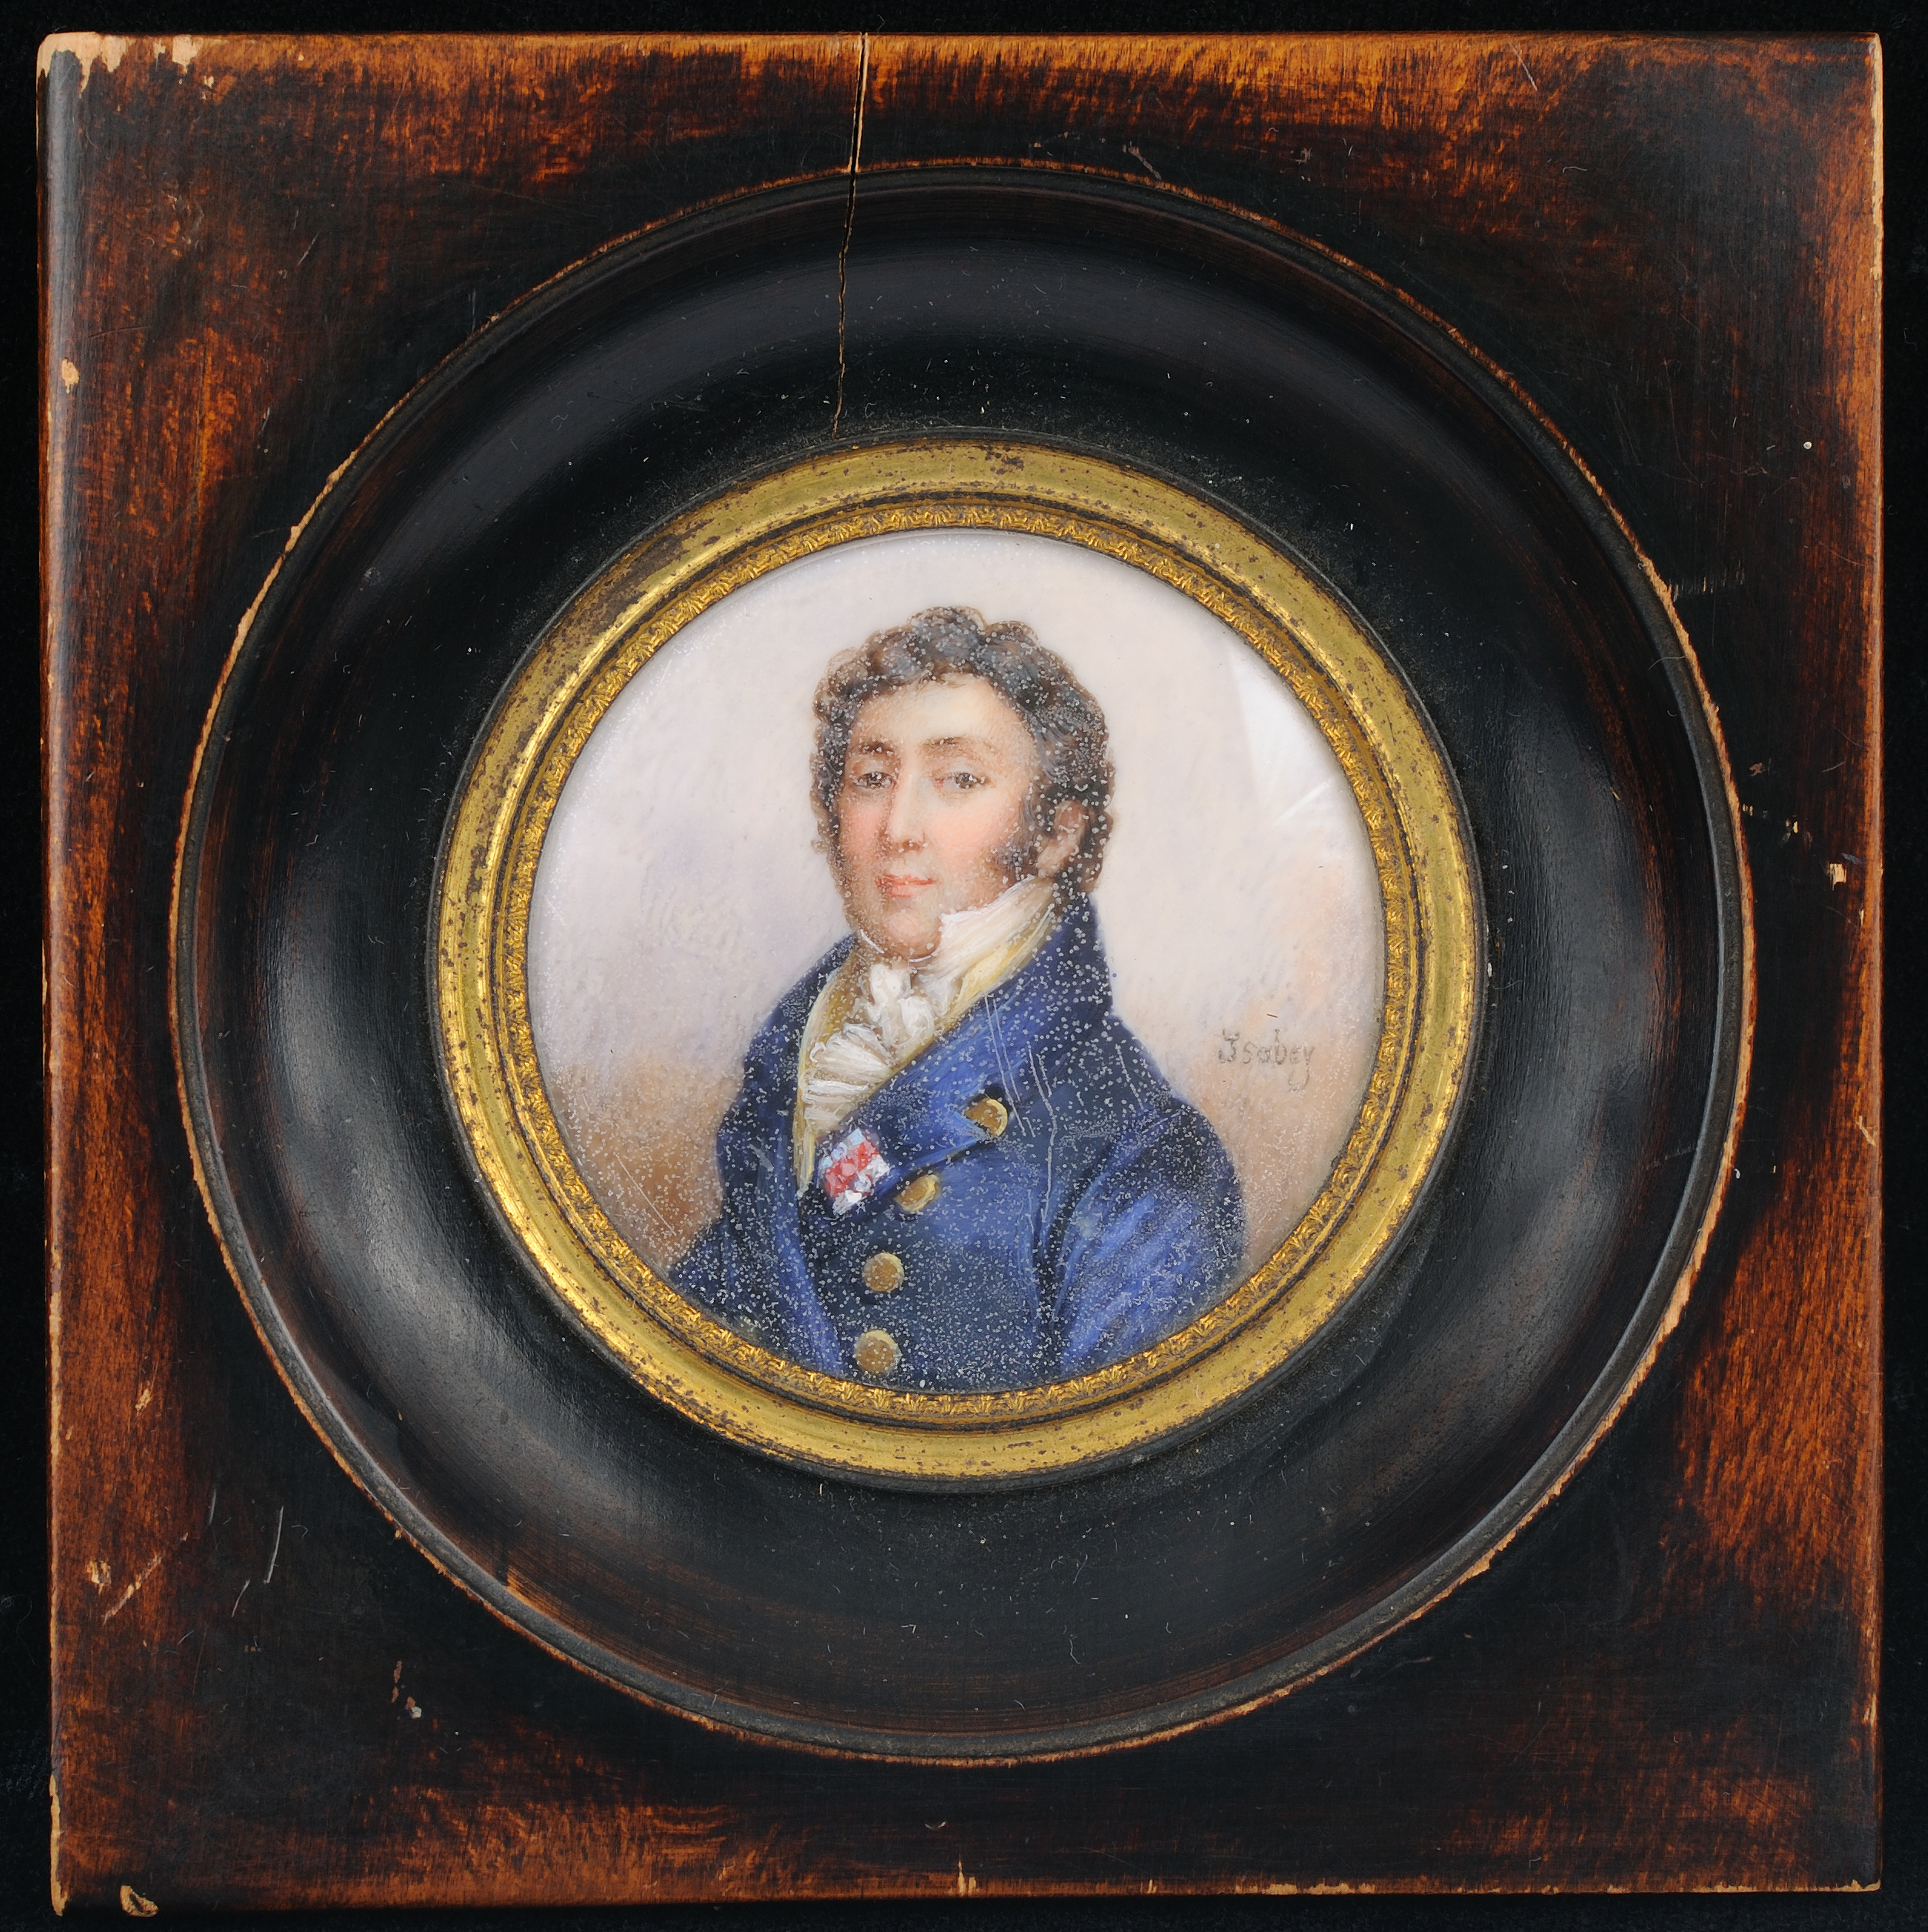 Duc de Montmorency-Laval portrait miniature by Jean-Baptiste Isabey, late 18th-early 19th century